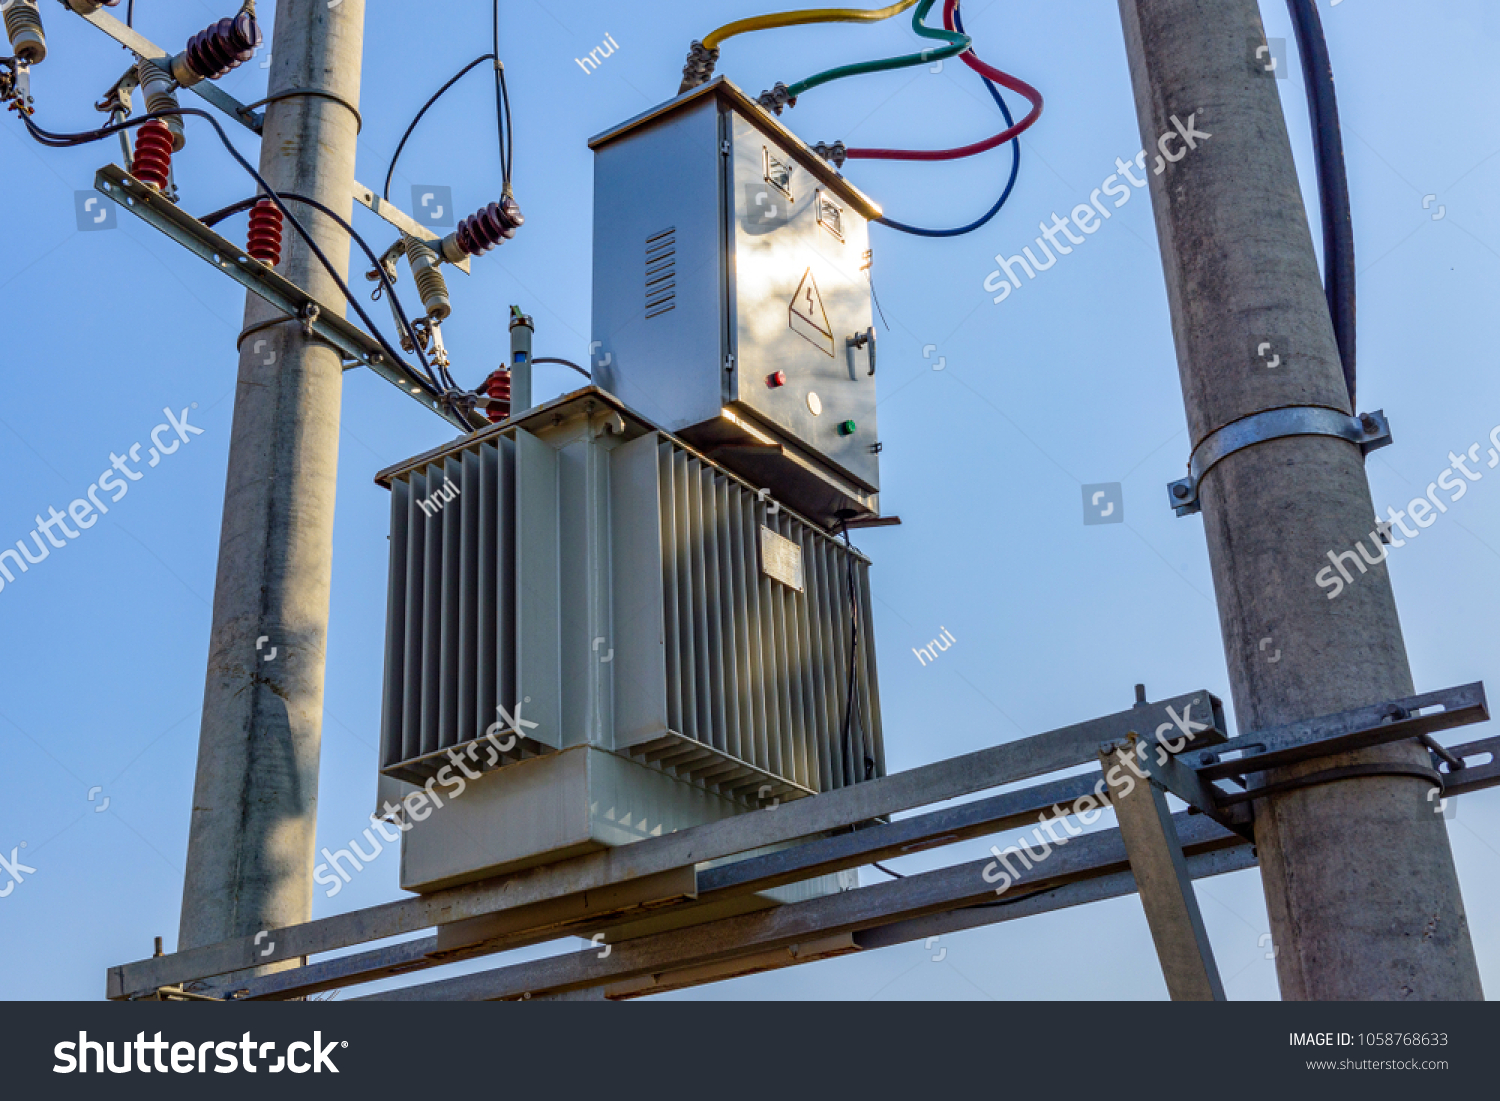 stock-photo-pole-mounted-distribution-transformer-for-residential-and-light-commercial-service-pole-mounted-1058768633.jpg